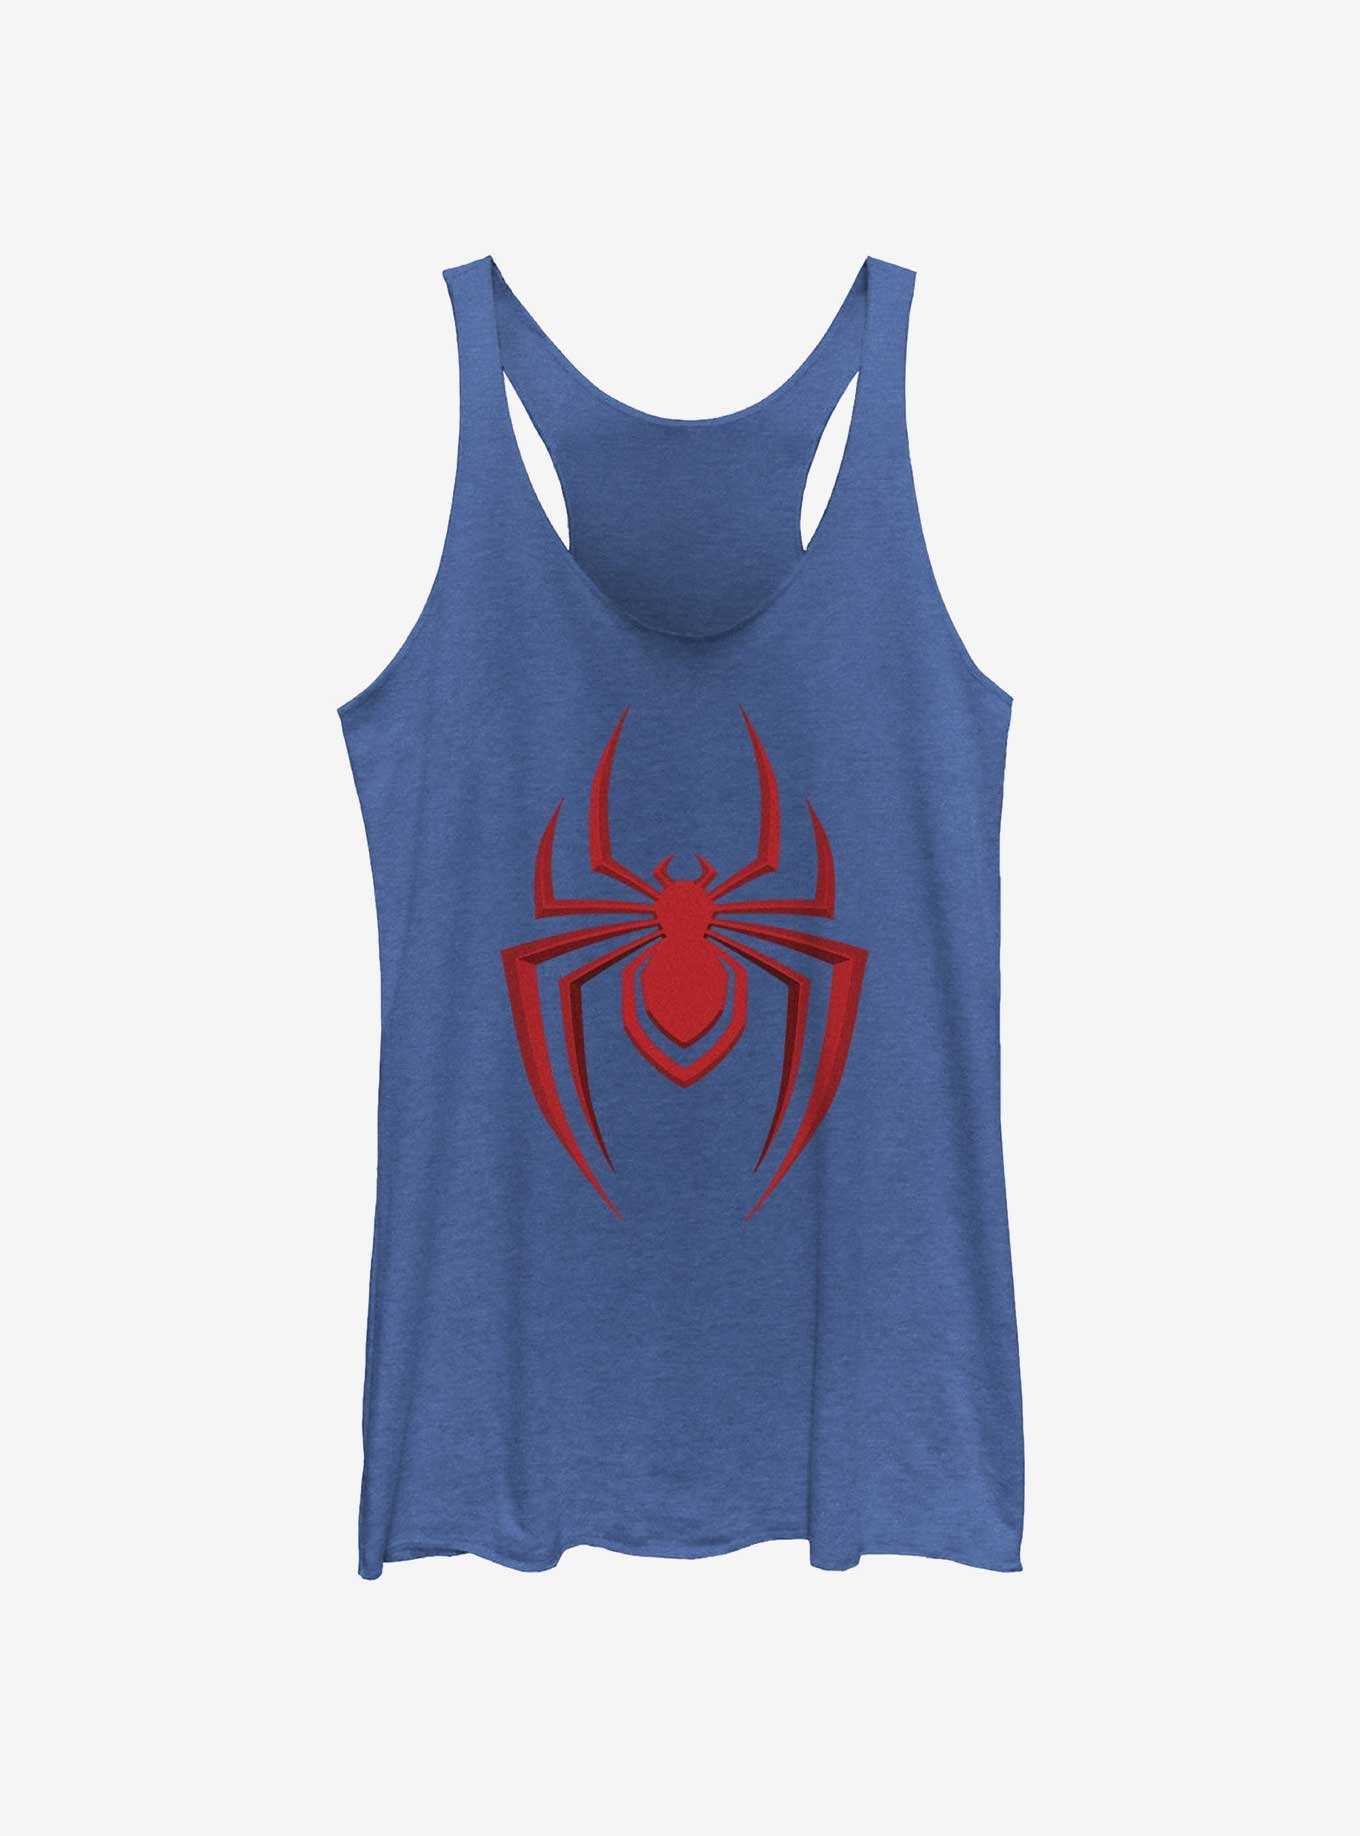 Marvel Spider-Man 2 Game Red Spider Icon Womens Tank Top, , hi-res